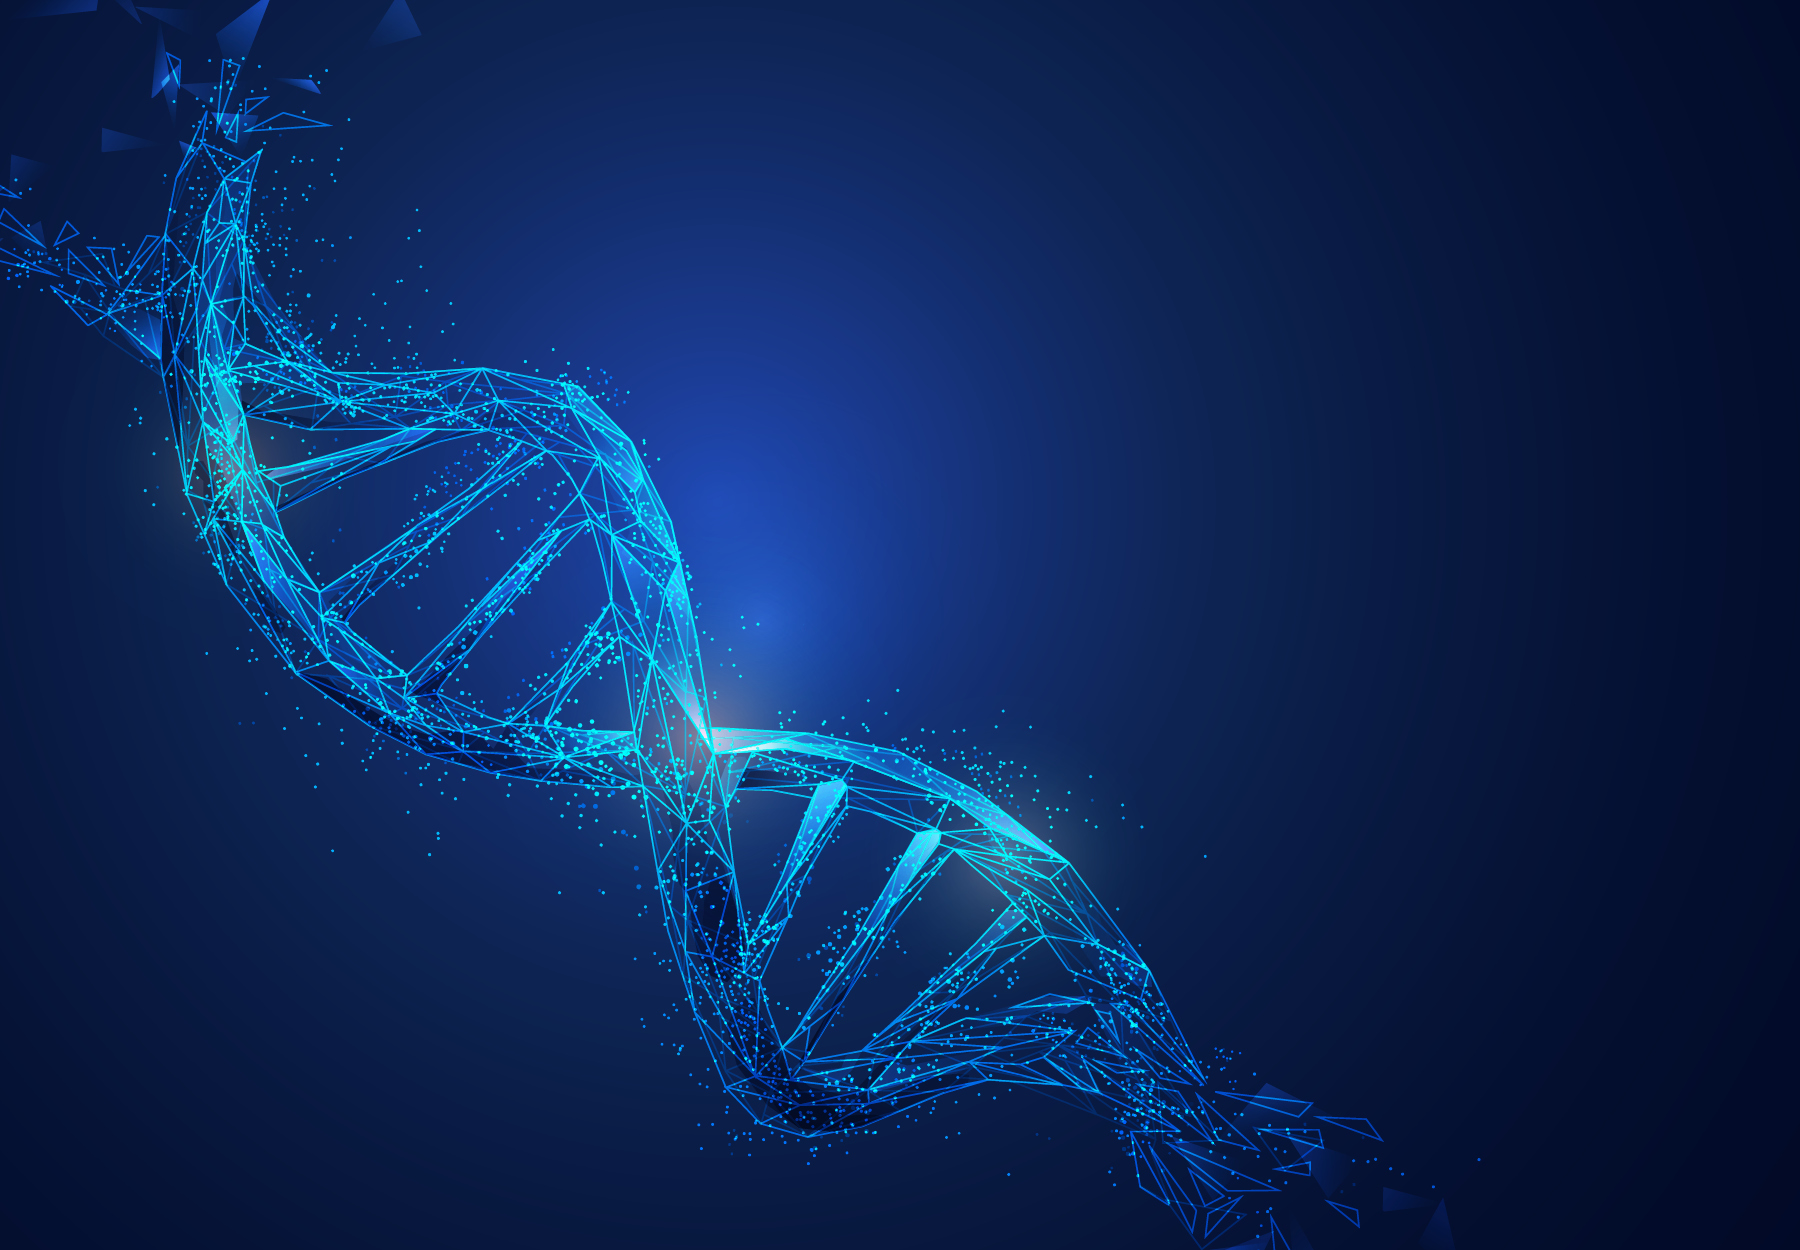 Abstract blue computer rendering of DNA strand. iStock image.